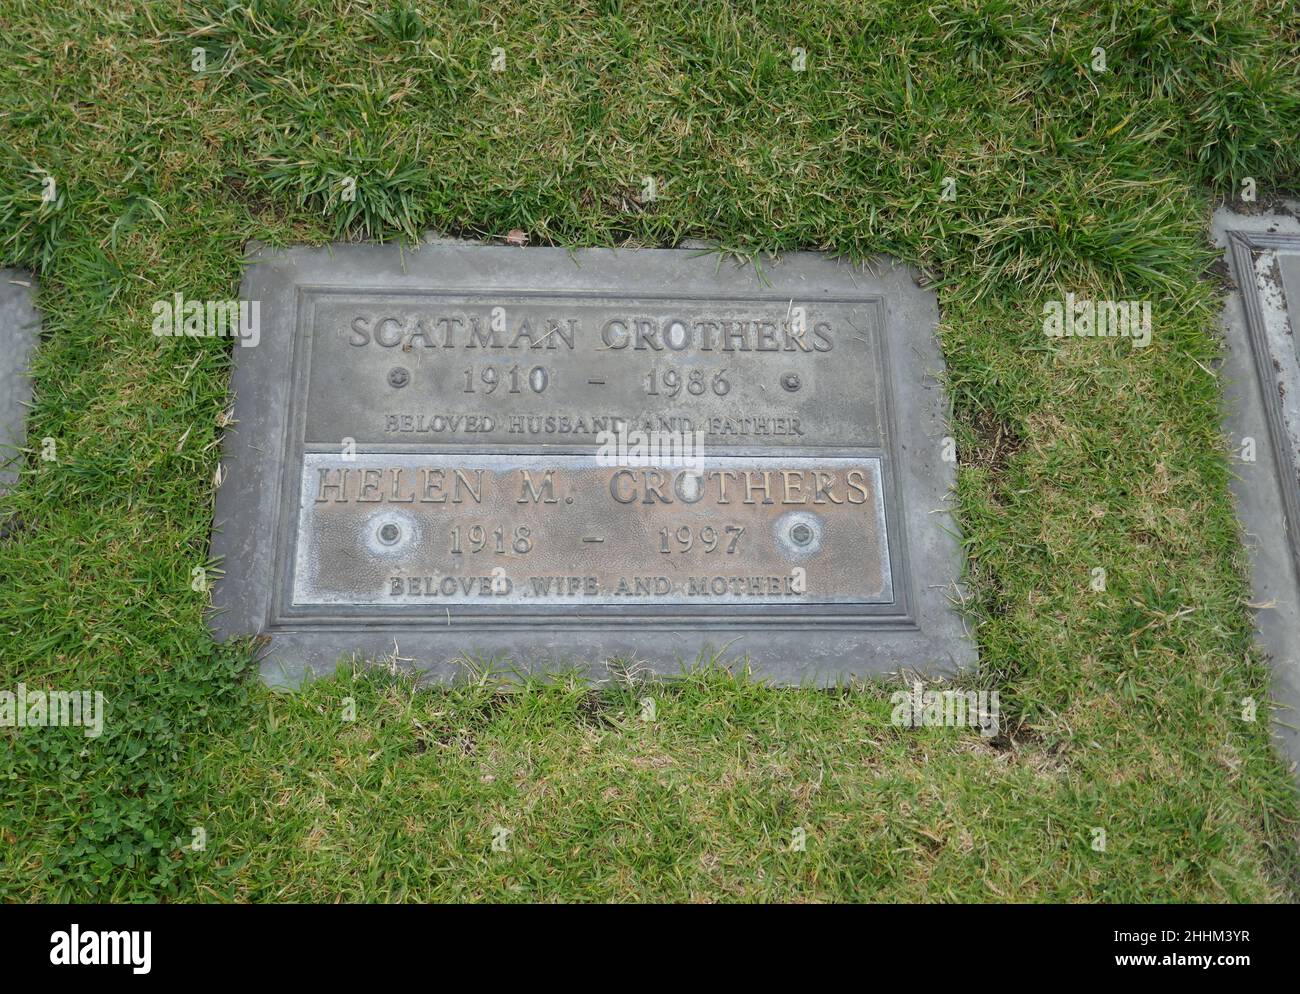 Los Angeles, California, USA 19th January 2022 Actor Scatman Crothers Grave in Lincoln Terrace at Forest Lawn Memorial Park Hollywood Hills on January 19, 2022 in Los Angeles, California, USA. Photo by Barry King/Alamy Stock Photo Stock Photo